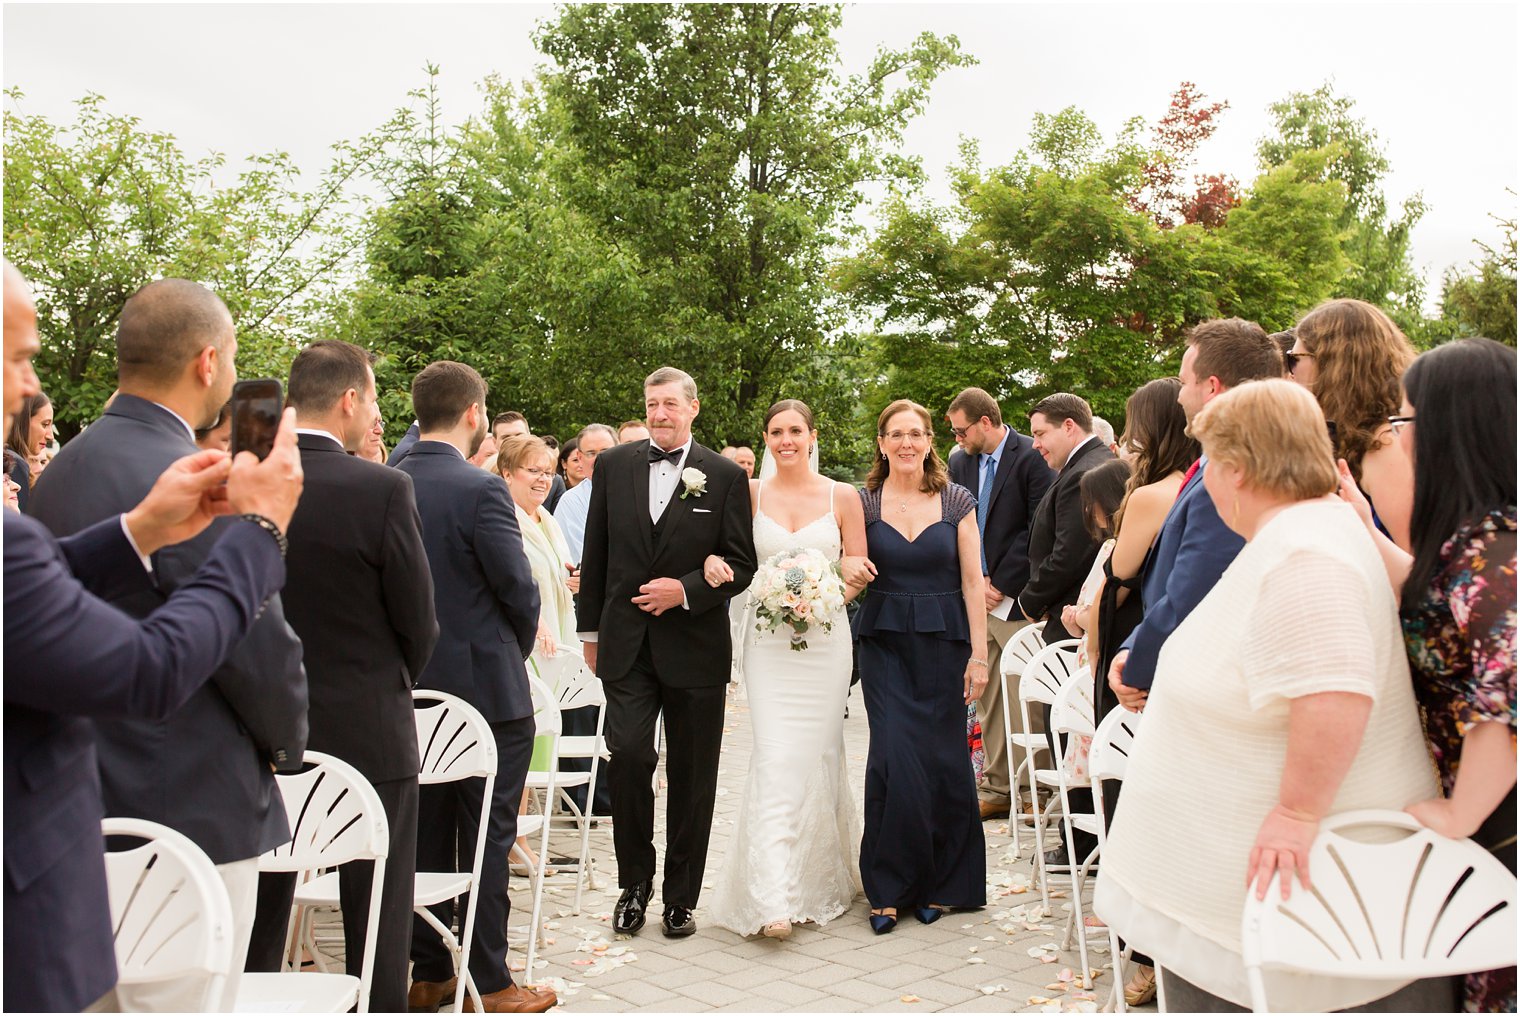 Processional photo at Windows on the Water at Frogbridge | Photos by Idalia Photography